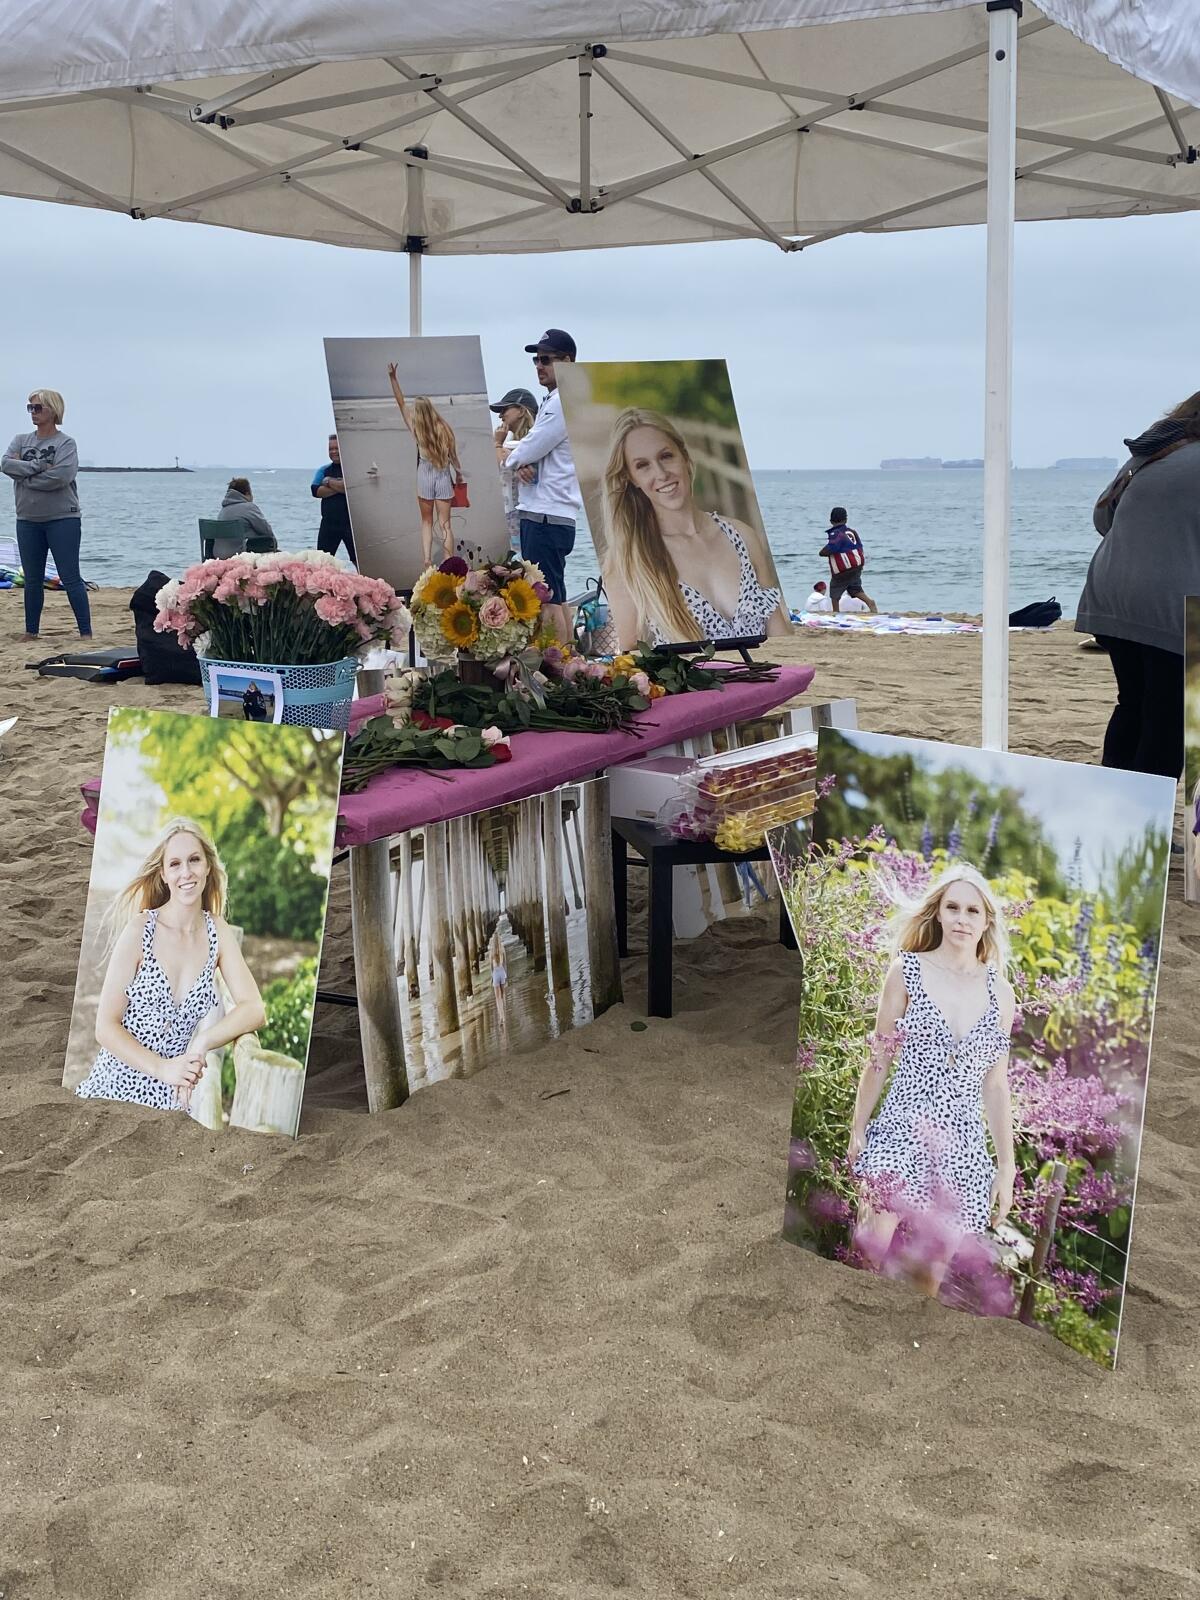 A memorial of photos and flowers is set up for Rylee Goodrich at Seal Beach in Orange County